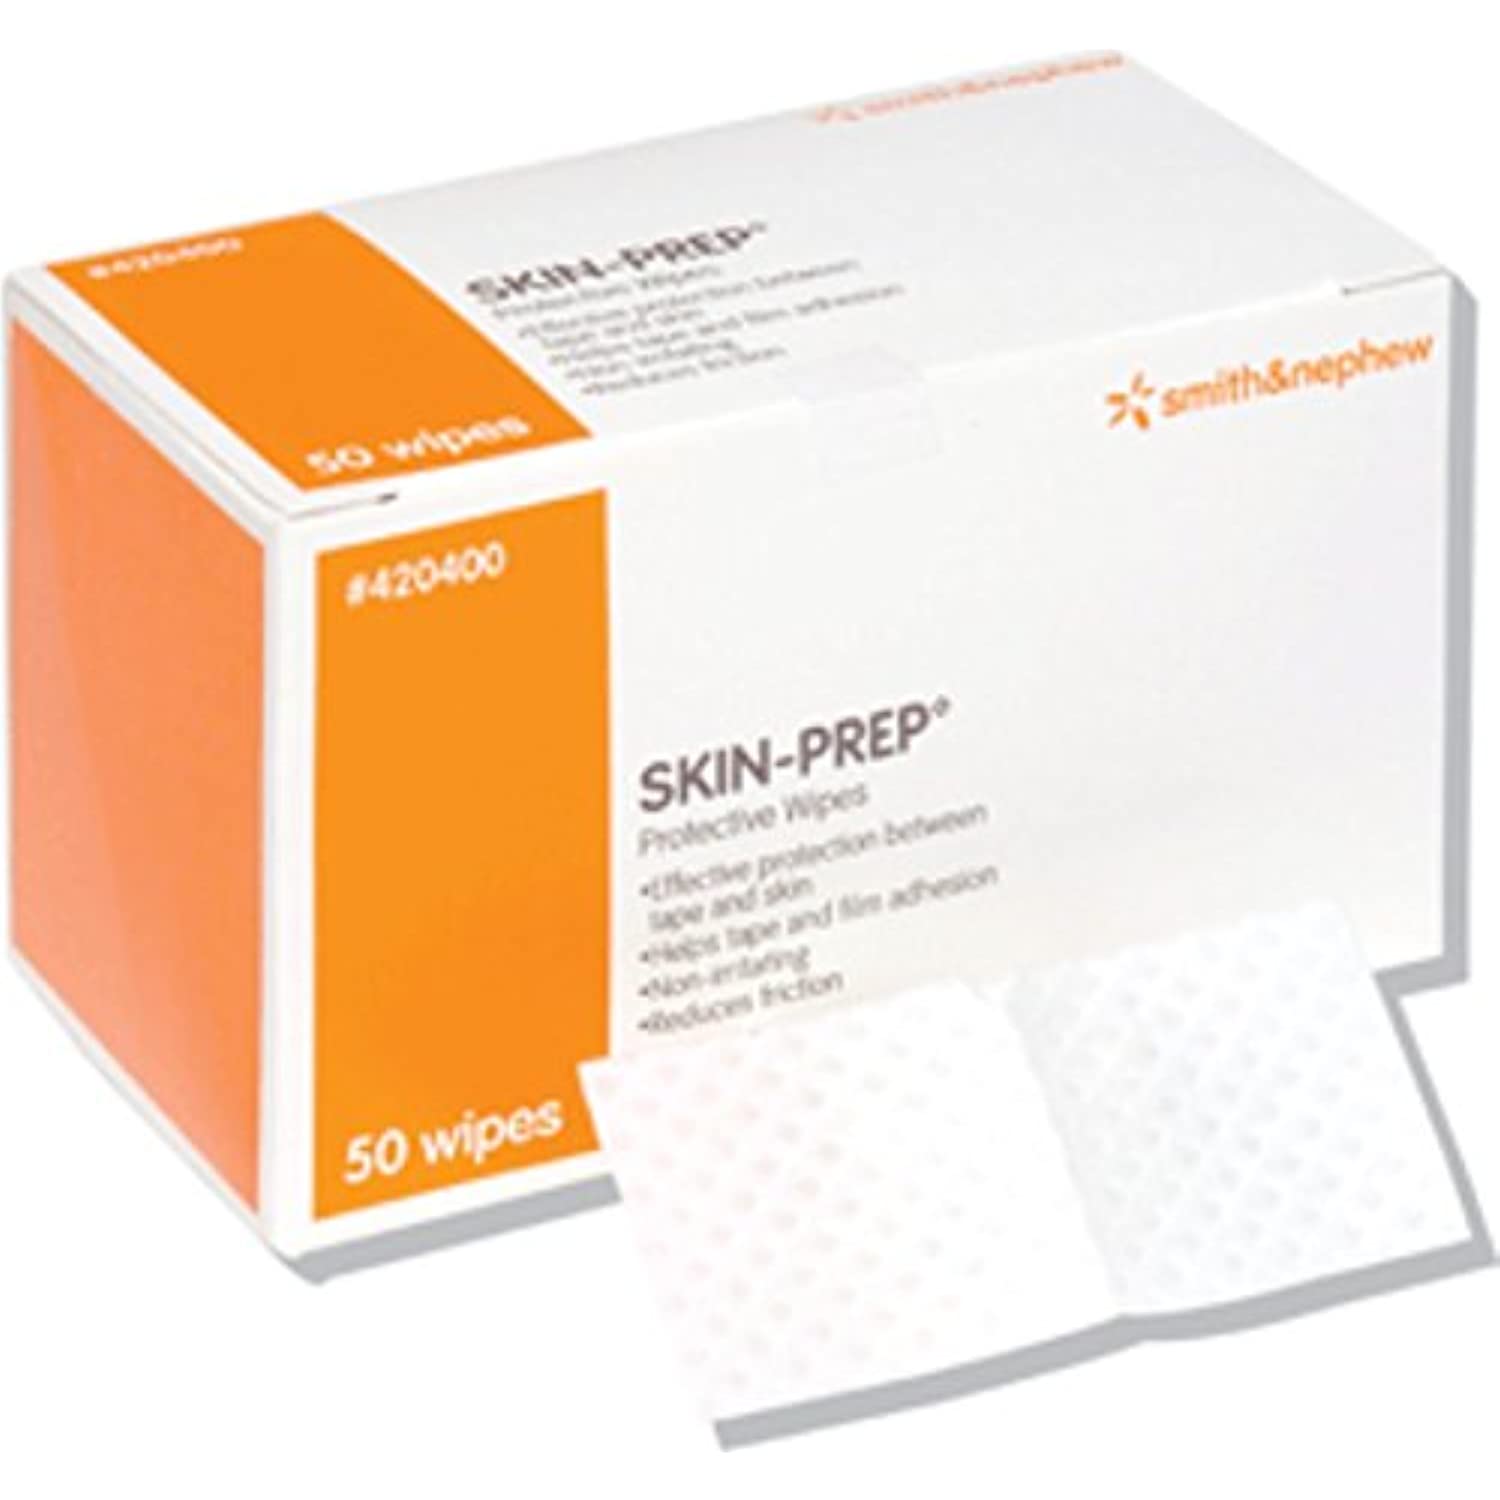 Skin-Prep Protective Wipes [420400] 50 Each (Pack of 6)